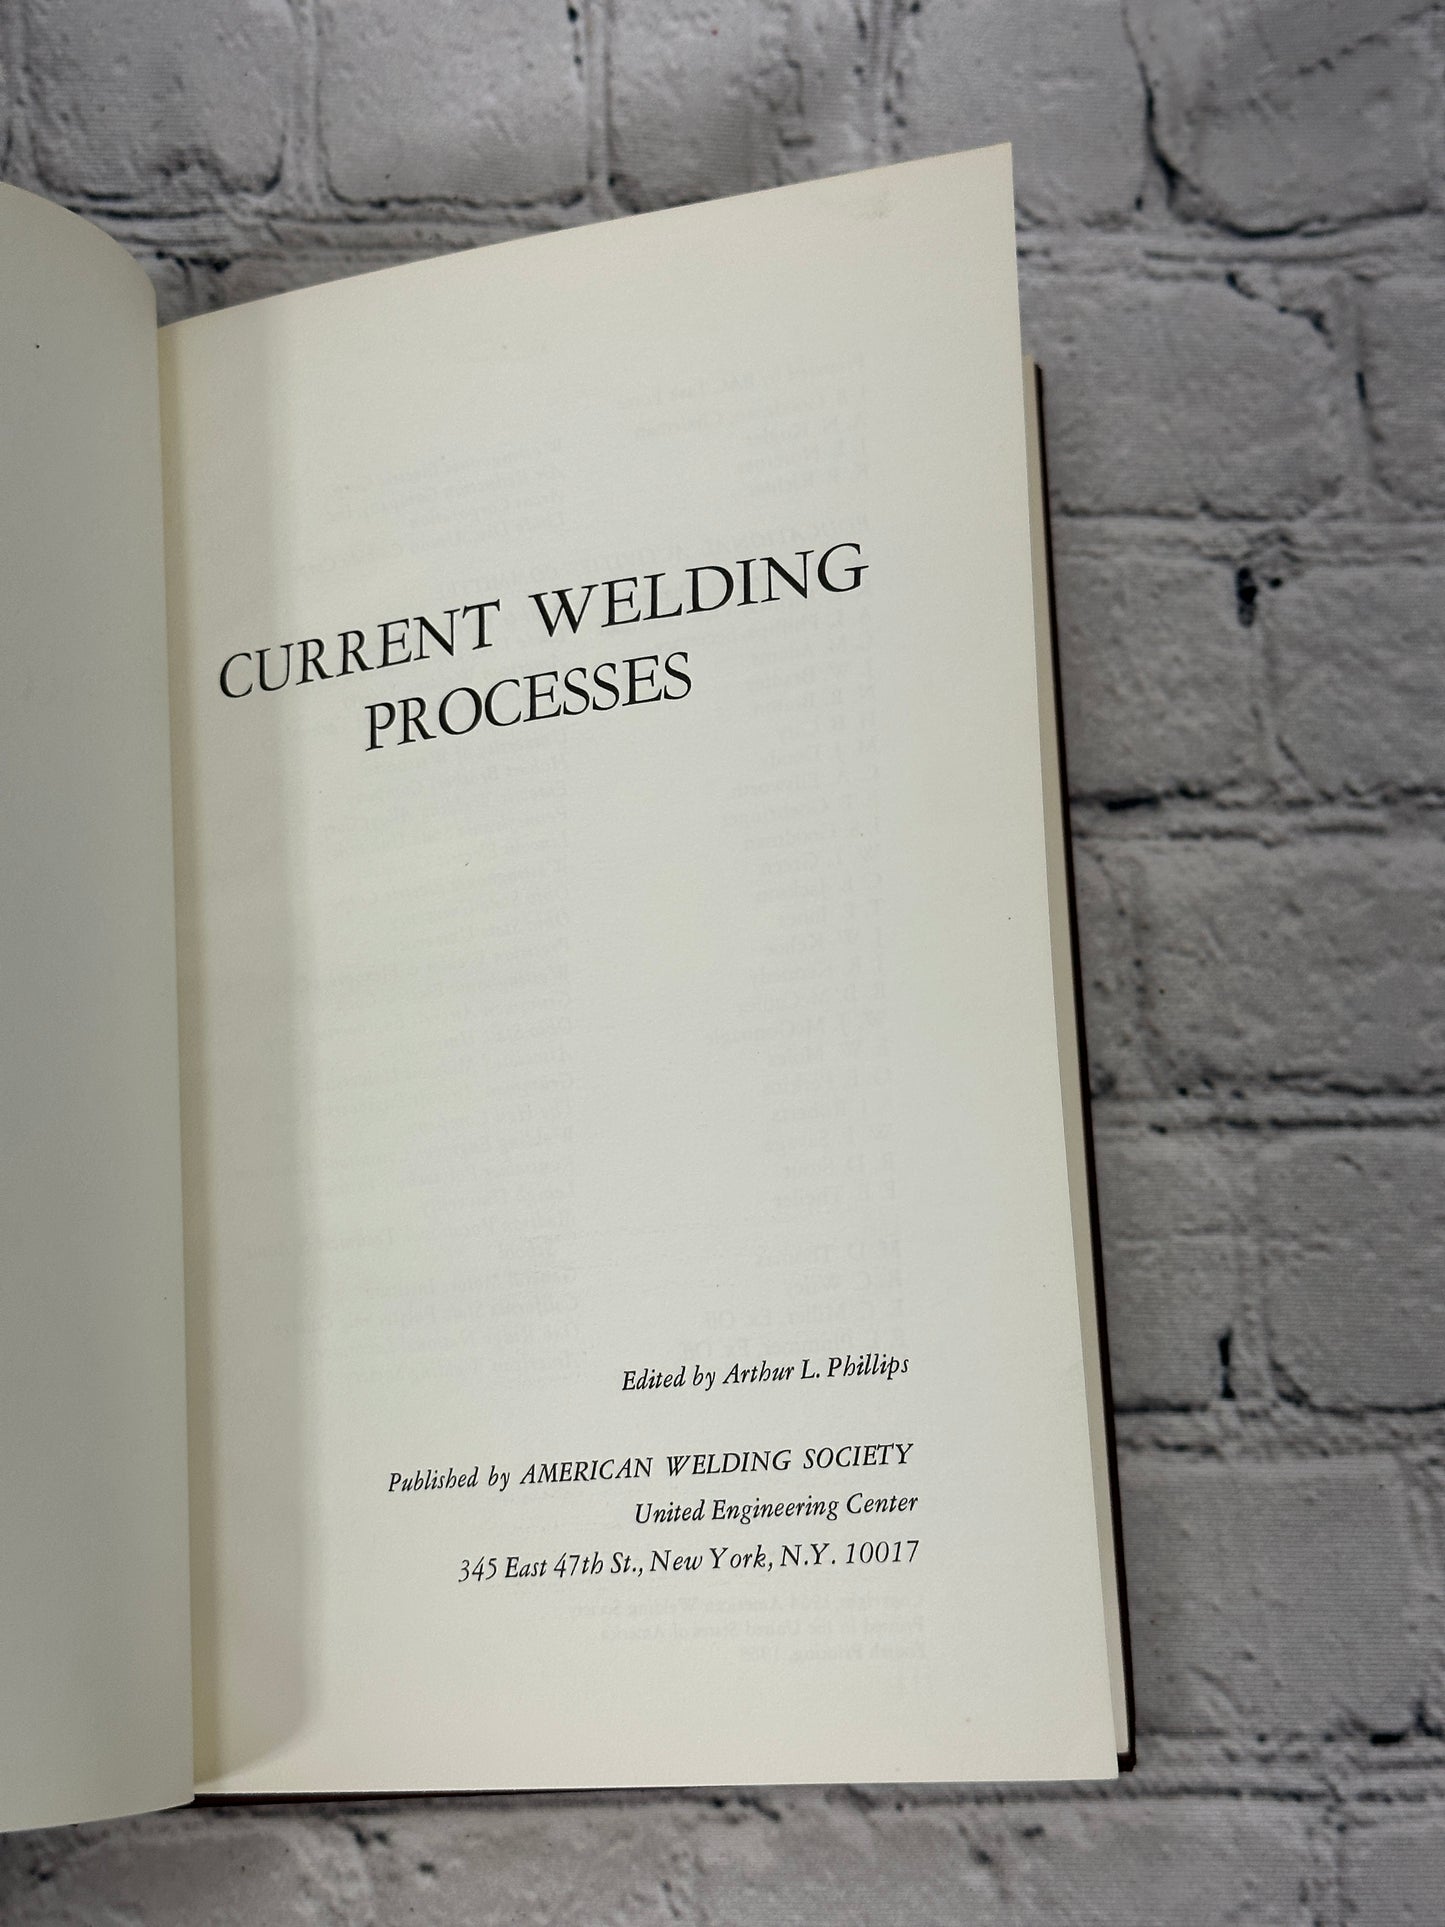 Current Welding Processes by Arthur Phillips [1968 · Fourth Printing]